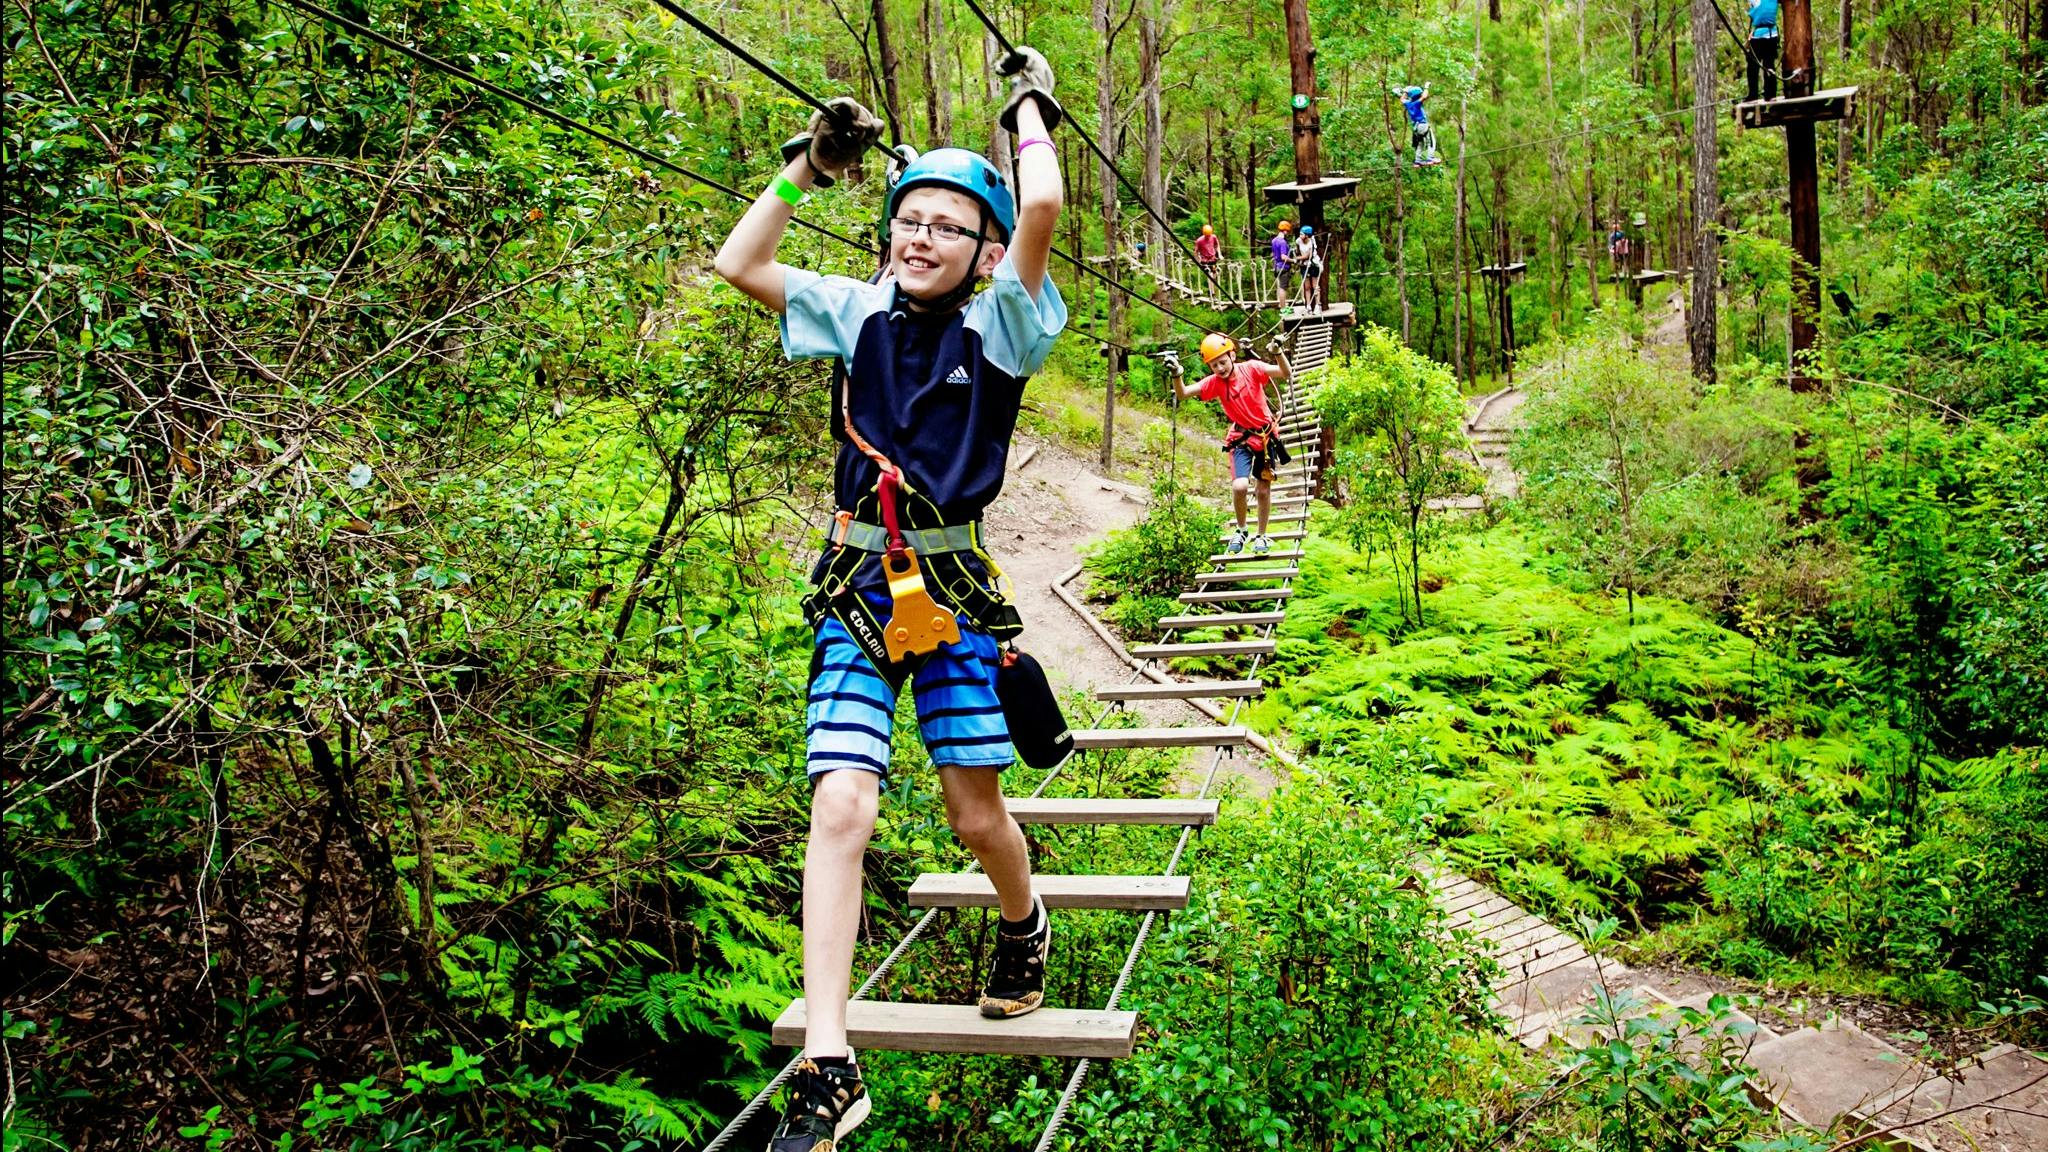 6 courses for the entire family to conquer their fears!